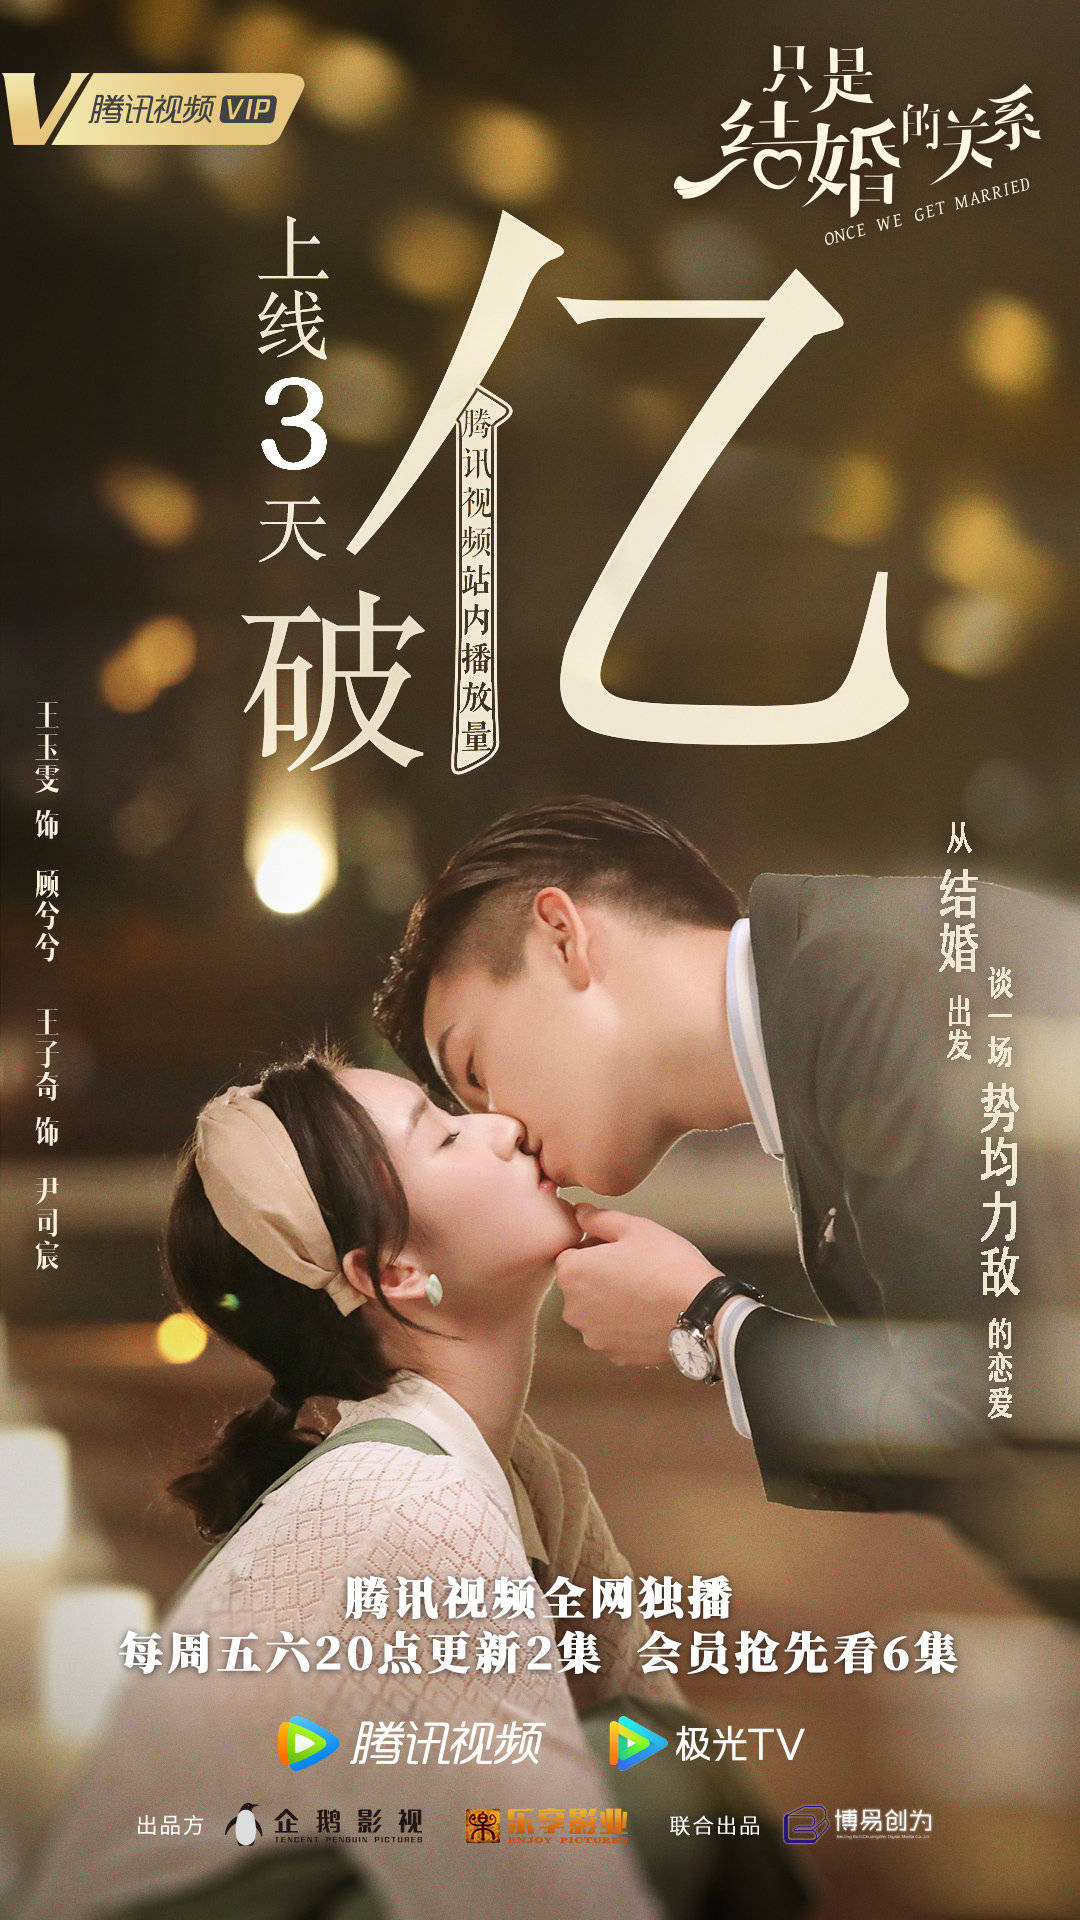 Nonton drama china once we get married 2021 sub indo